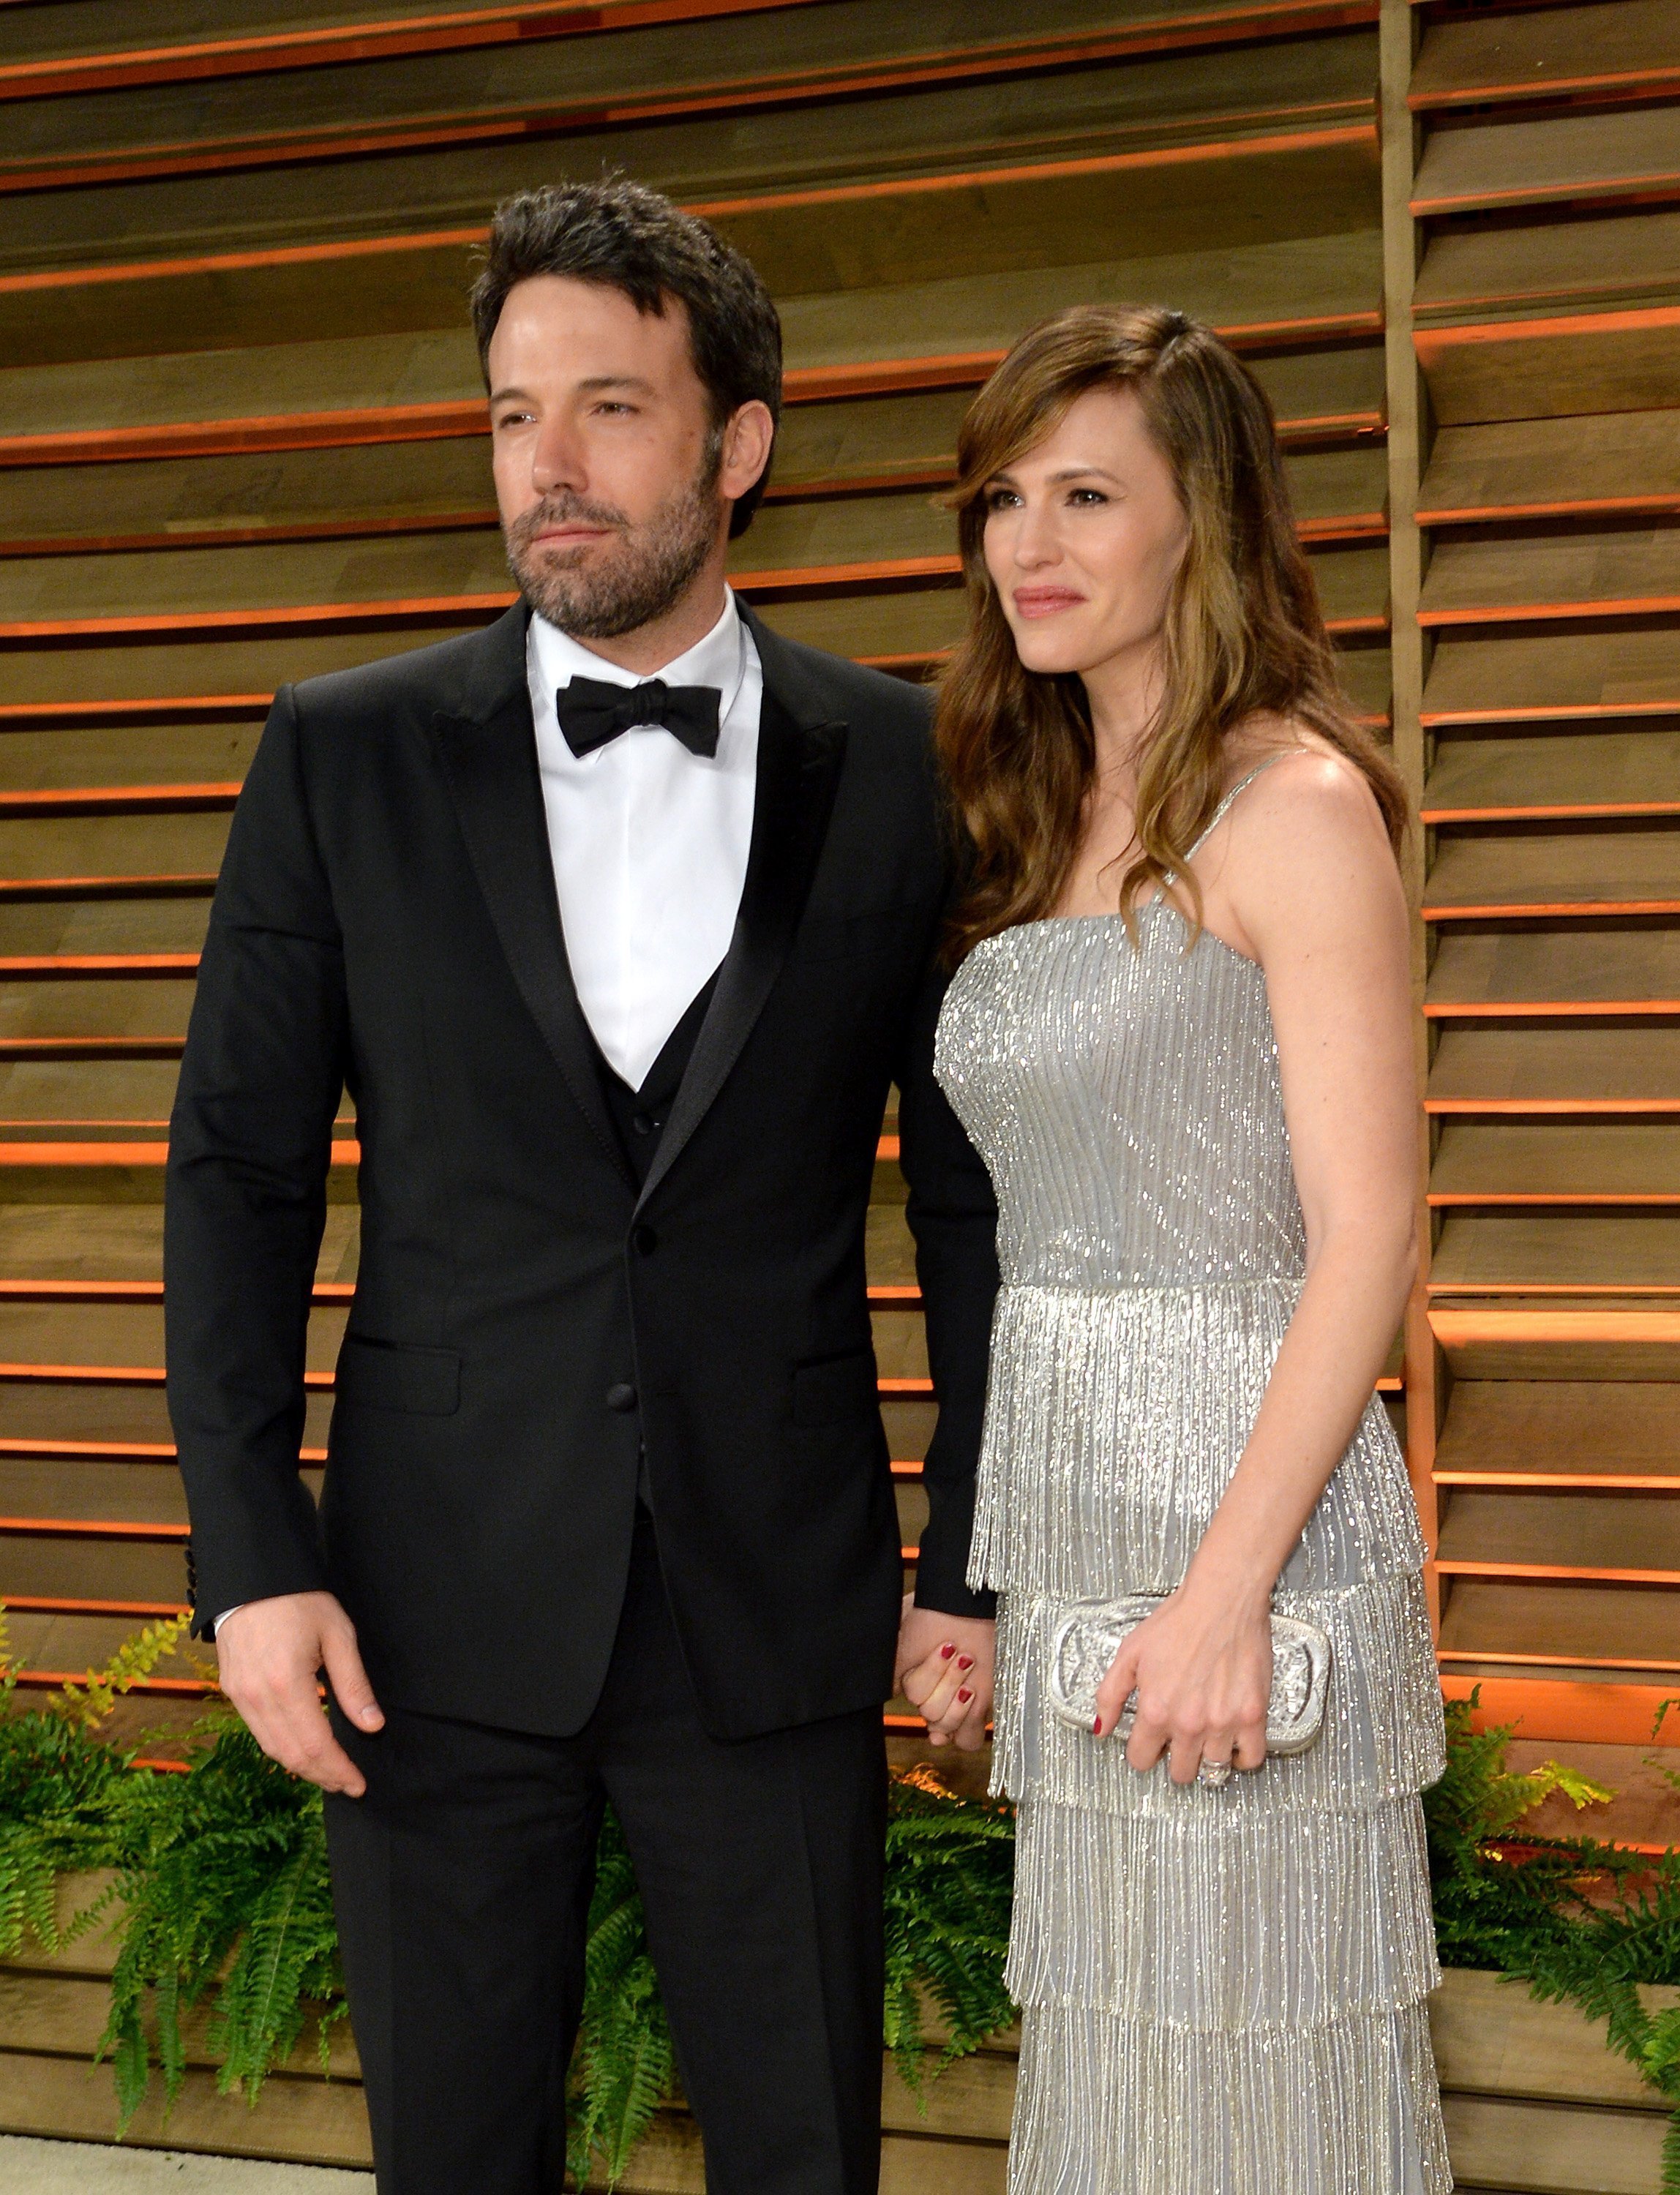 Ben Affleck and Jennifer Garner attend the Vanity Fair Oscar Party in West Hollywood, California on March 2, 2014 | Photo: Getty Images